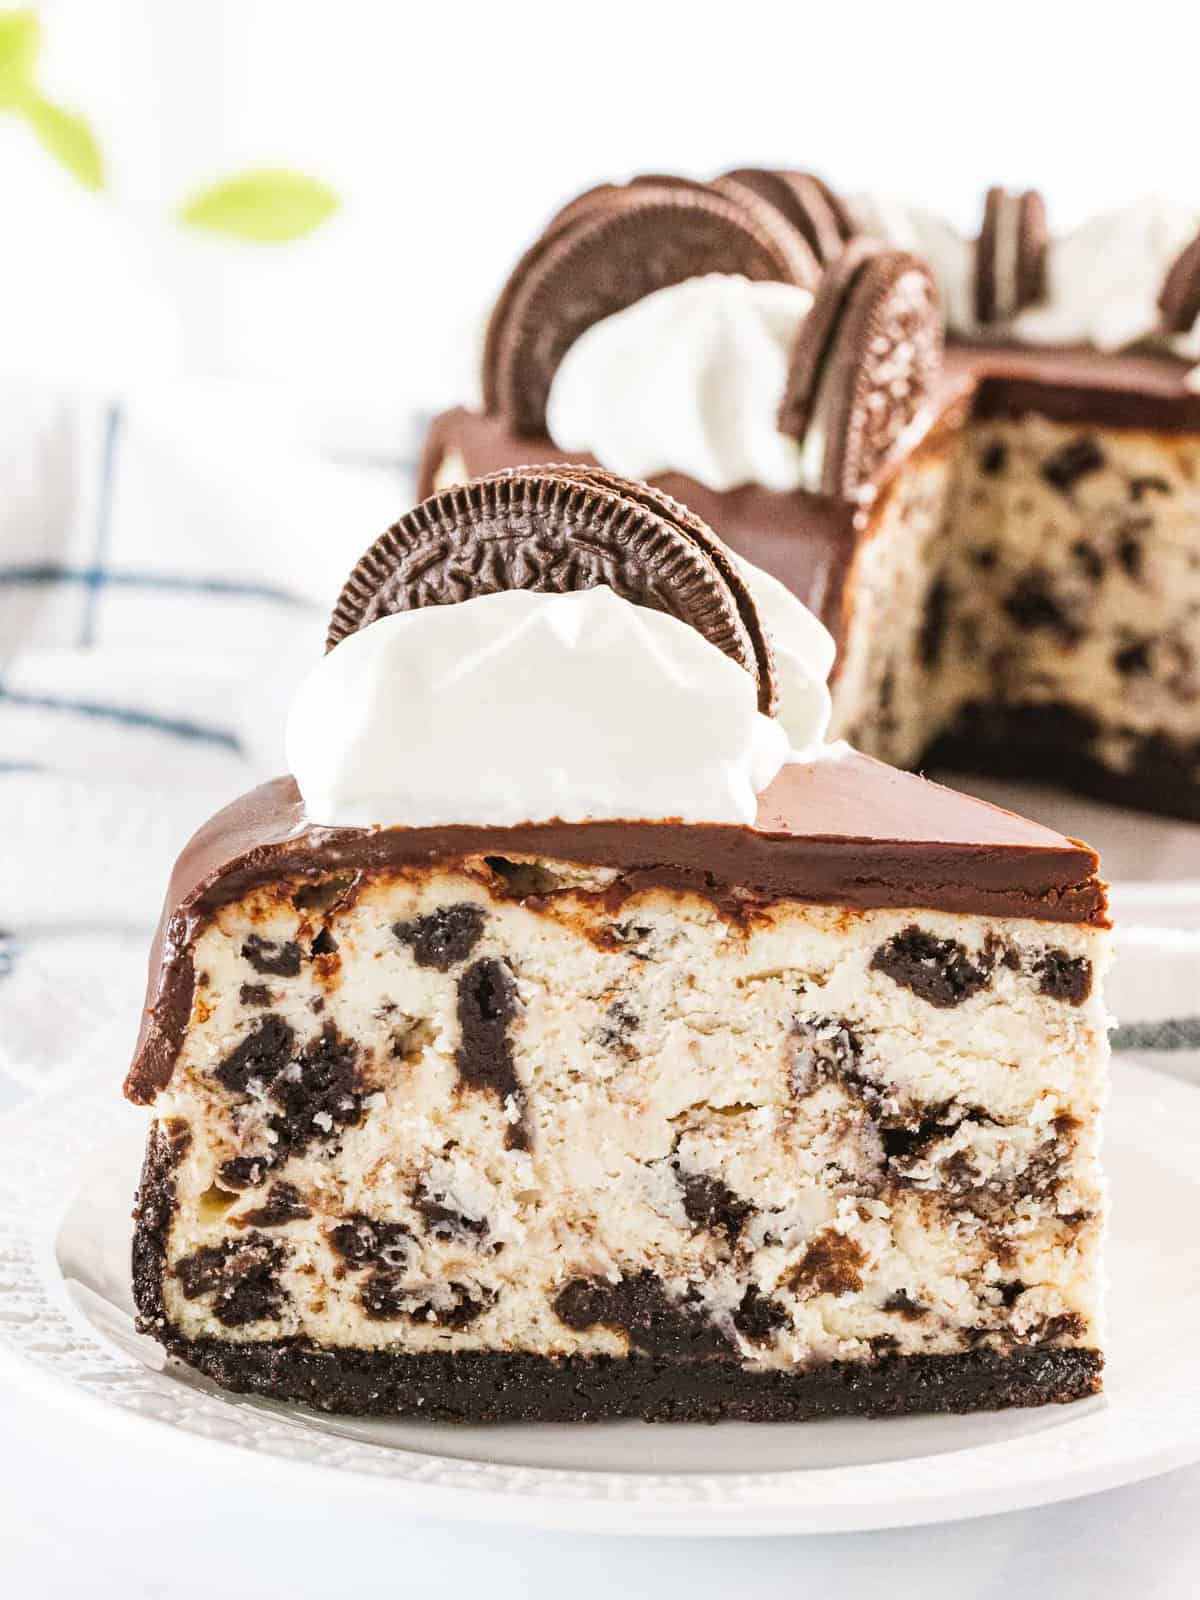 Oreo cheesecake filled with cookies and cream and topped with ganache.